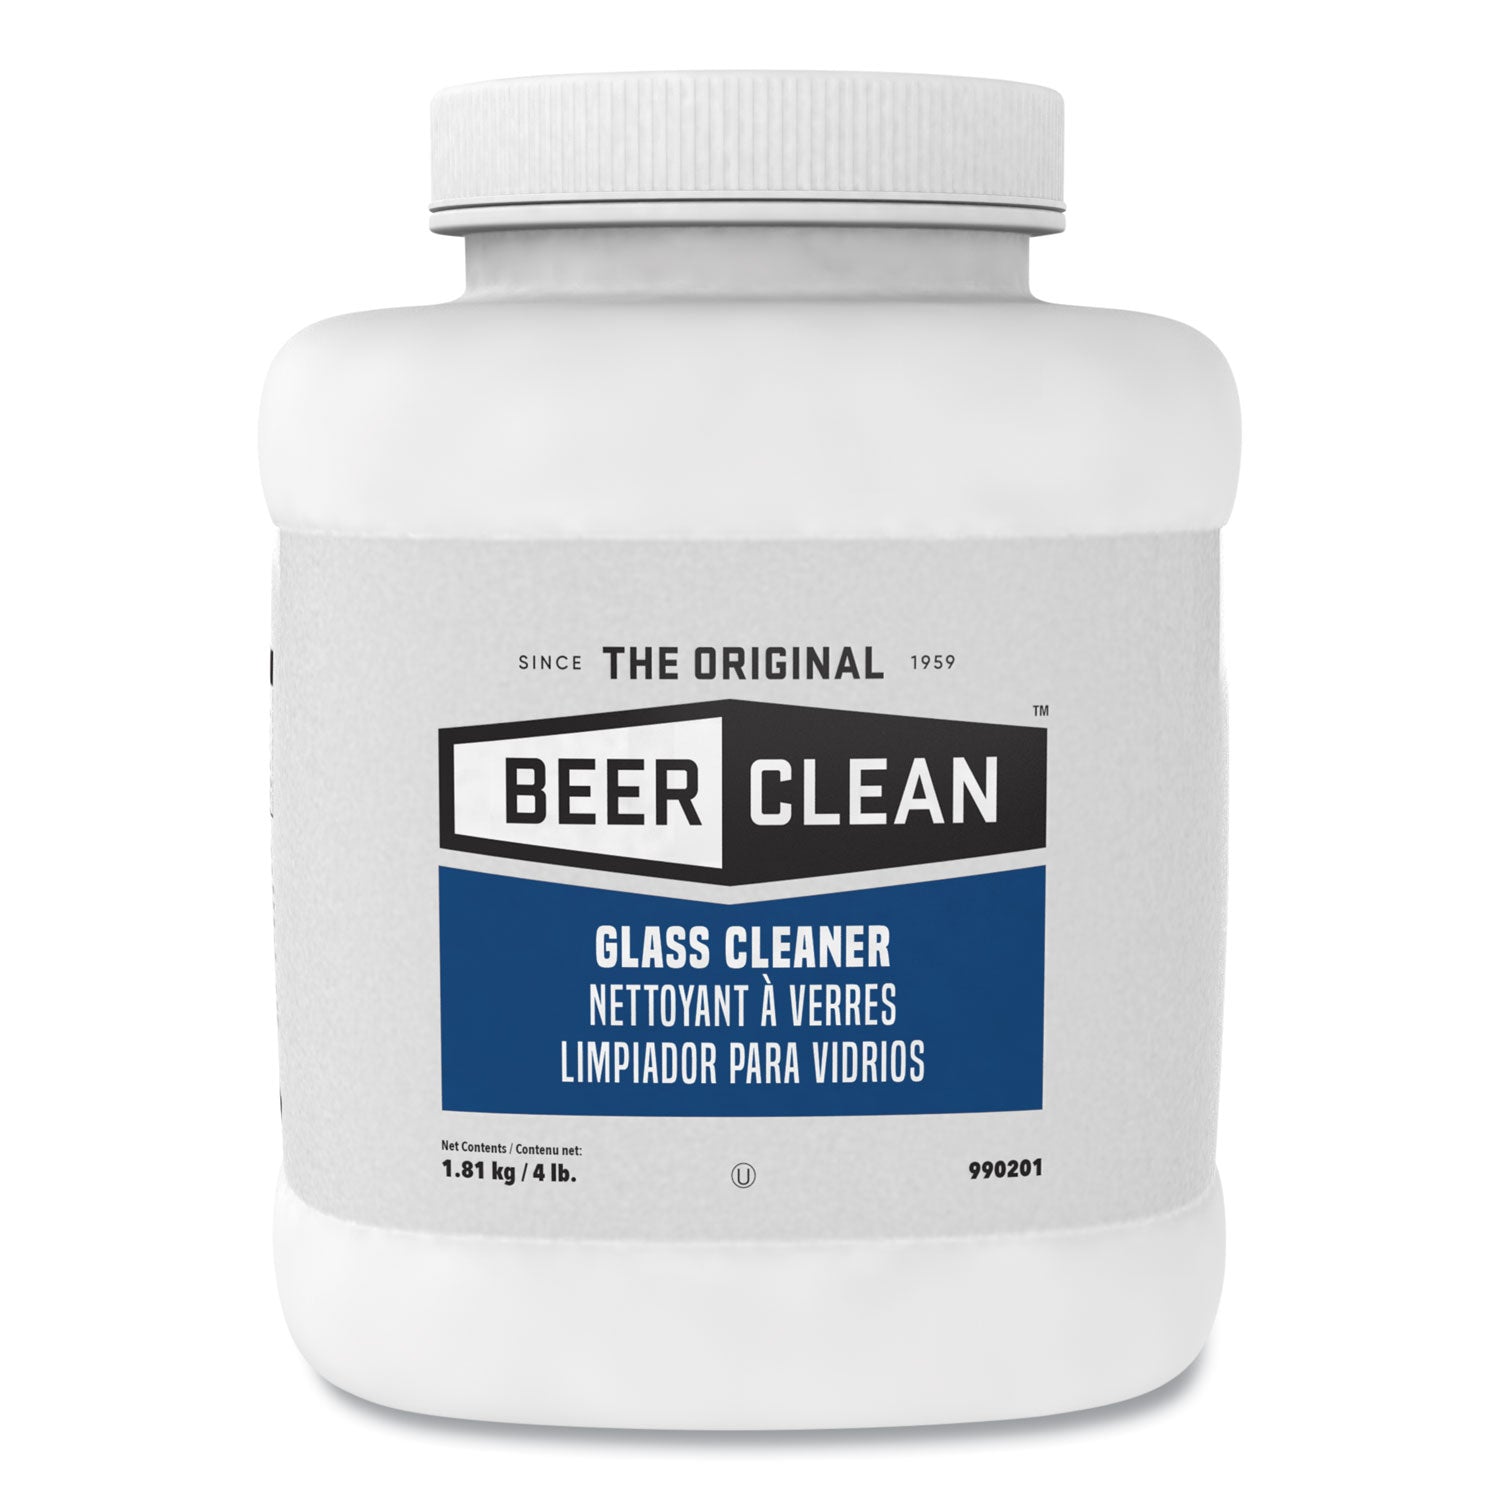 beer-clean-glass-cleaner-unscented-powder-4-lb-container_dvo990201 - 1